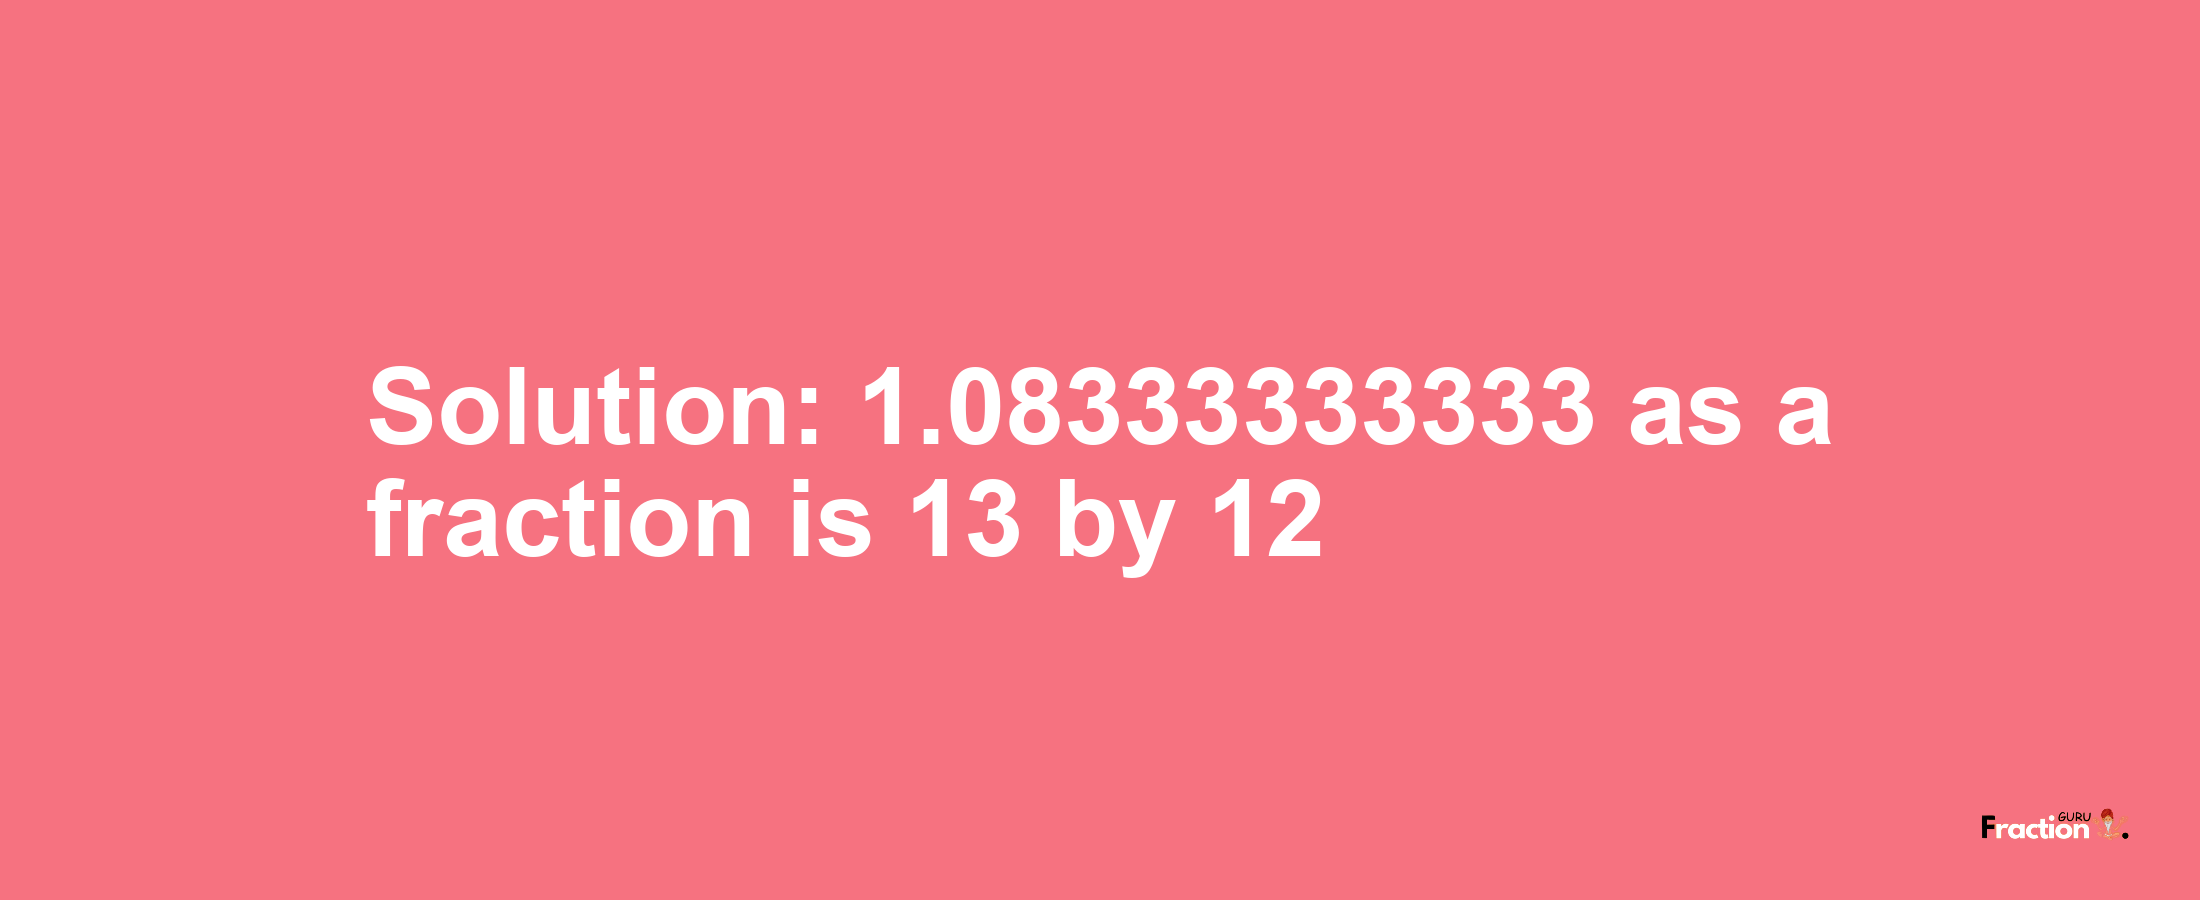 Solution:1.08333333333 as a fraction is 13/12